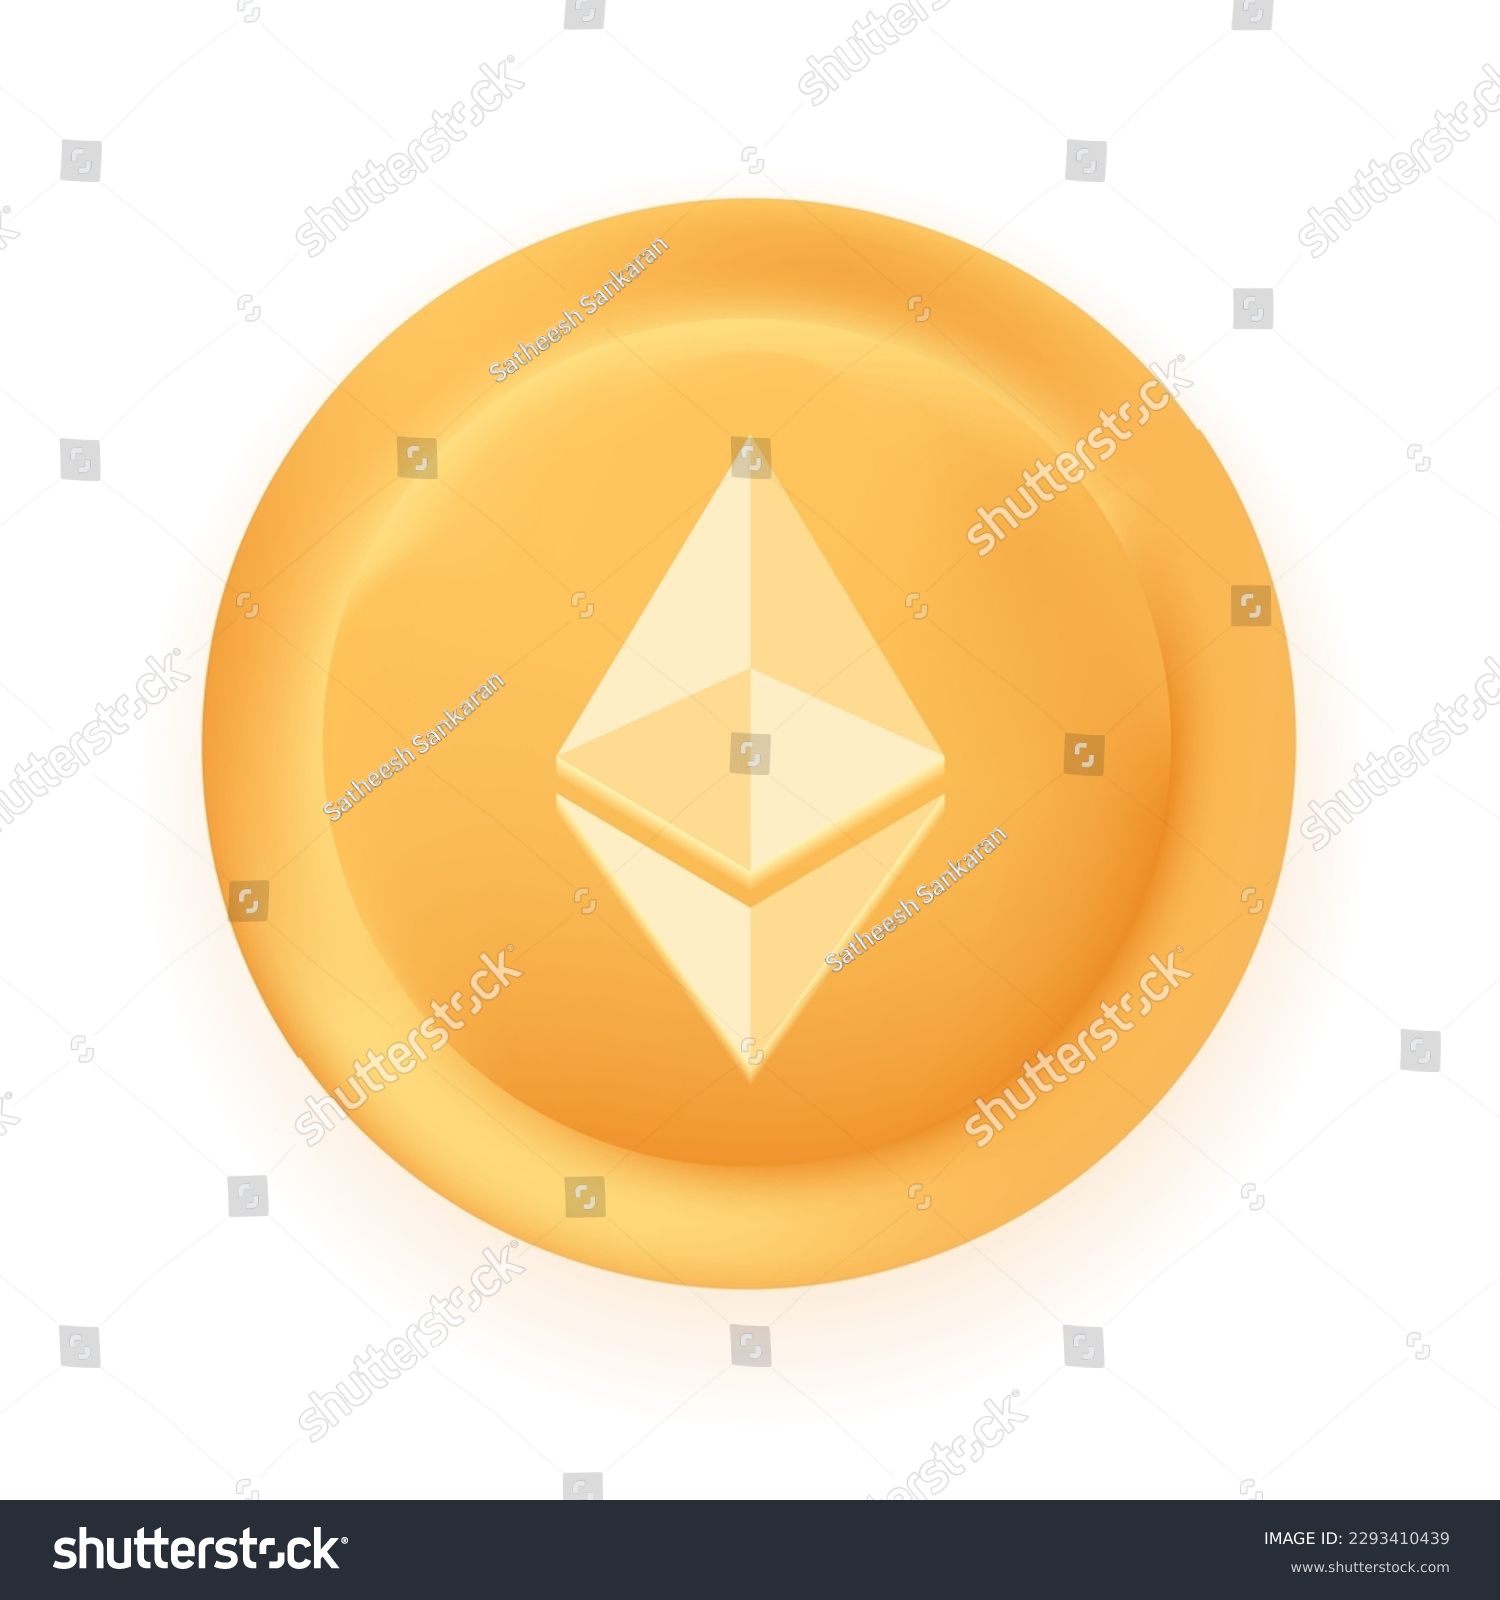 SVG of Ethereum (ETH) crypto currency 3D coin vector illustration isolated on white background. Can be used as virtual money icon, logo, emblem, sticker and badge designs. svg